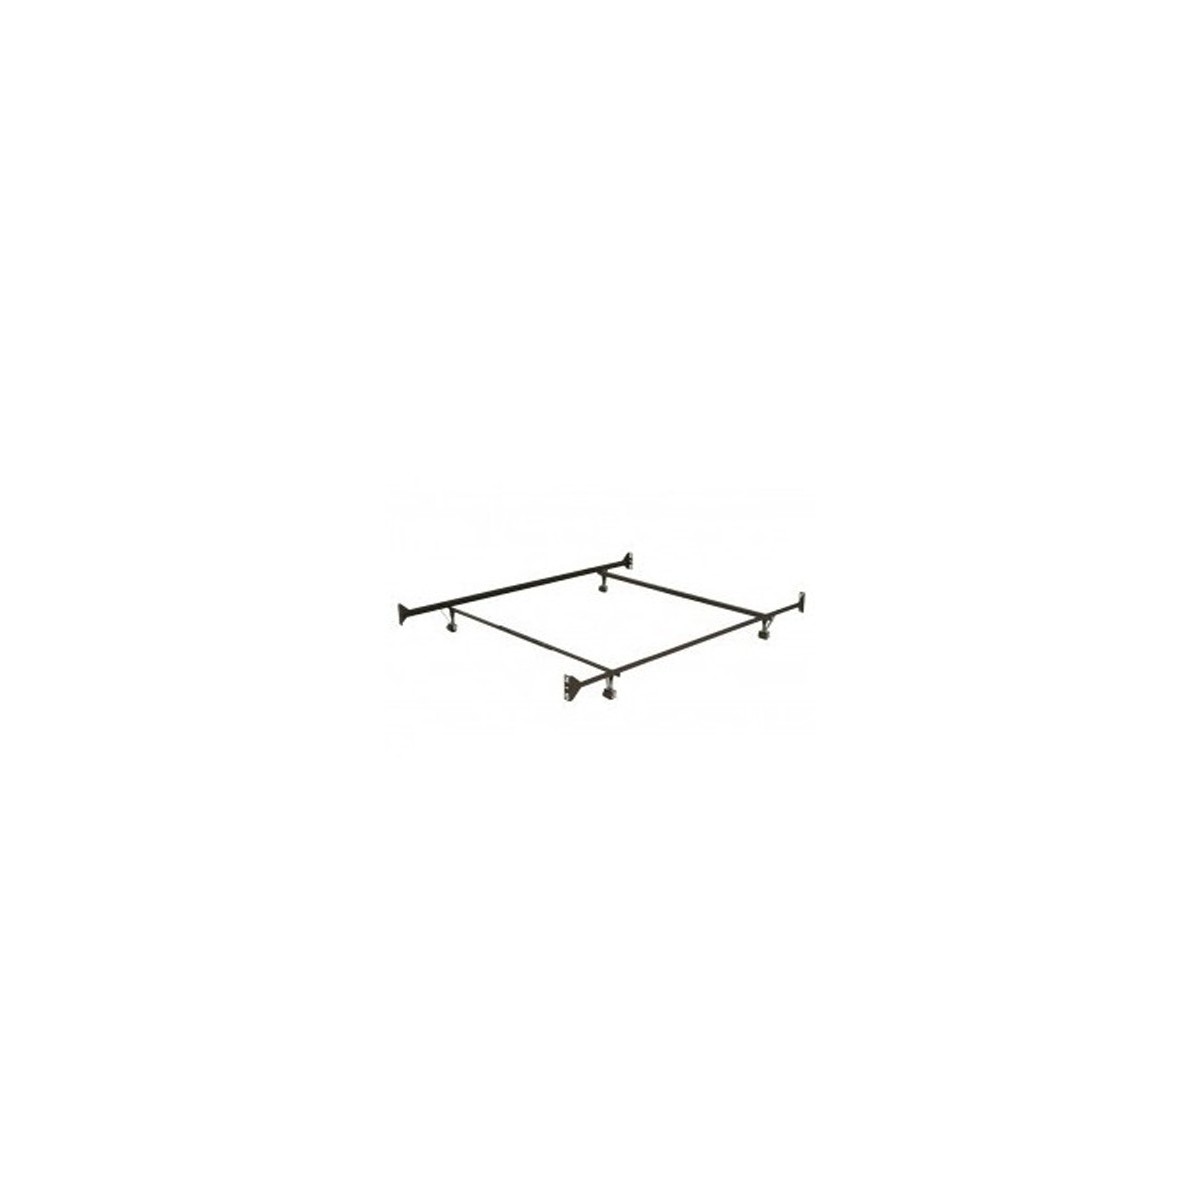 Metal bed base 755 DGL - head and foot